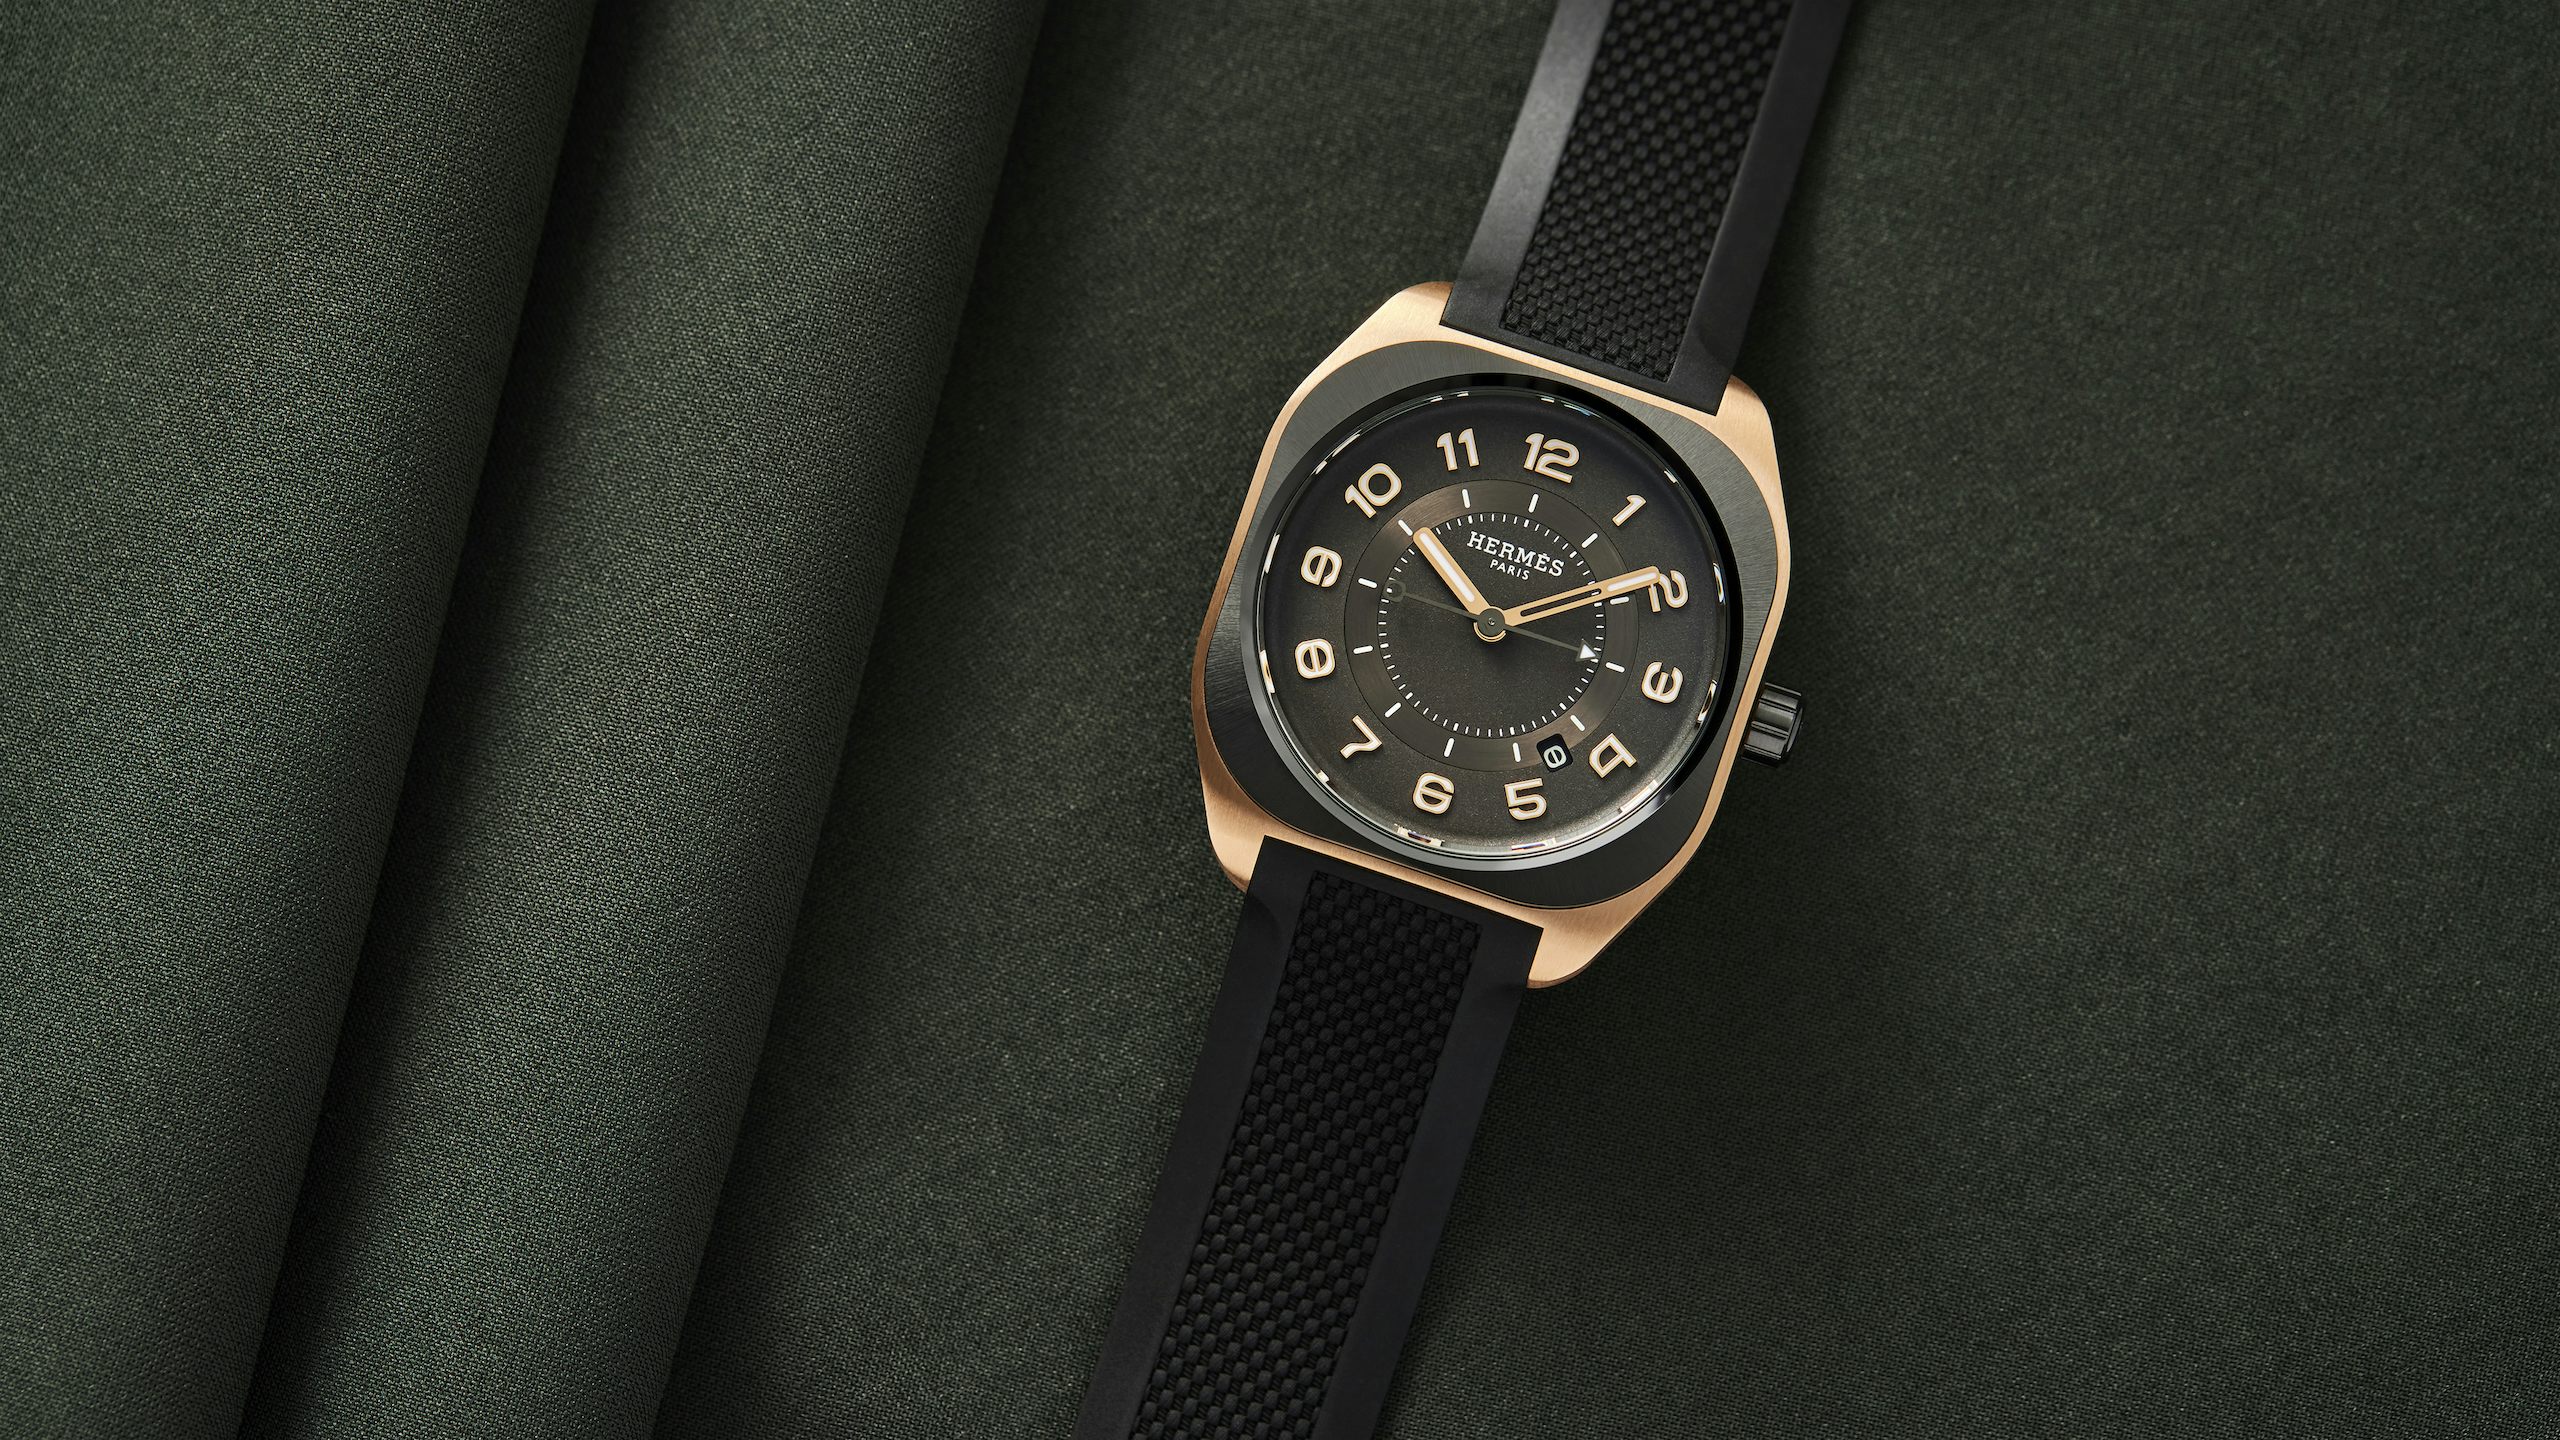 In The Shop: The Hermès Rose Gold H08 Has Officially Landed In The Hodinkee  Shop - Hodinkee